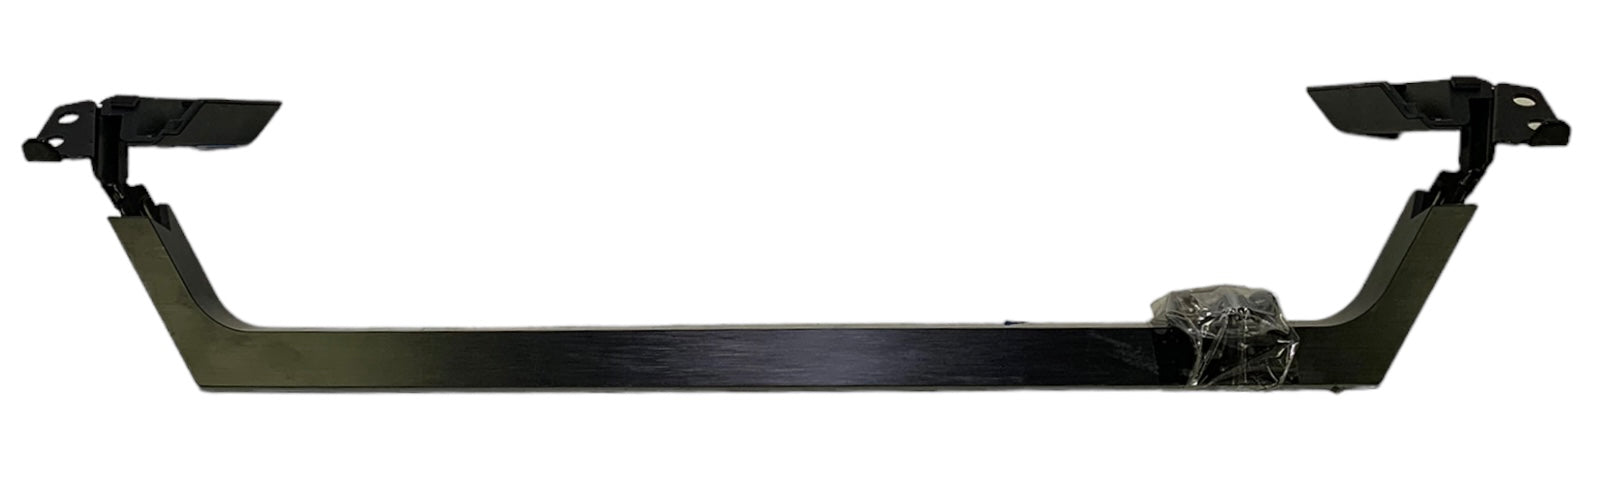 Sony KDL-32W600D TV Stand/Base